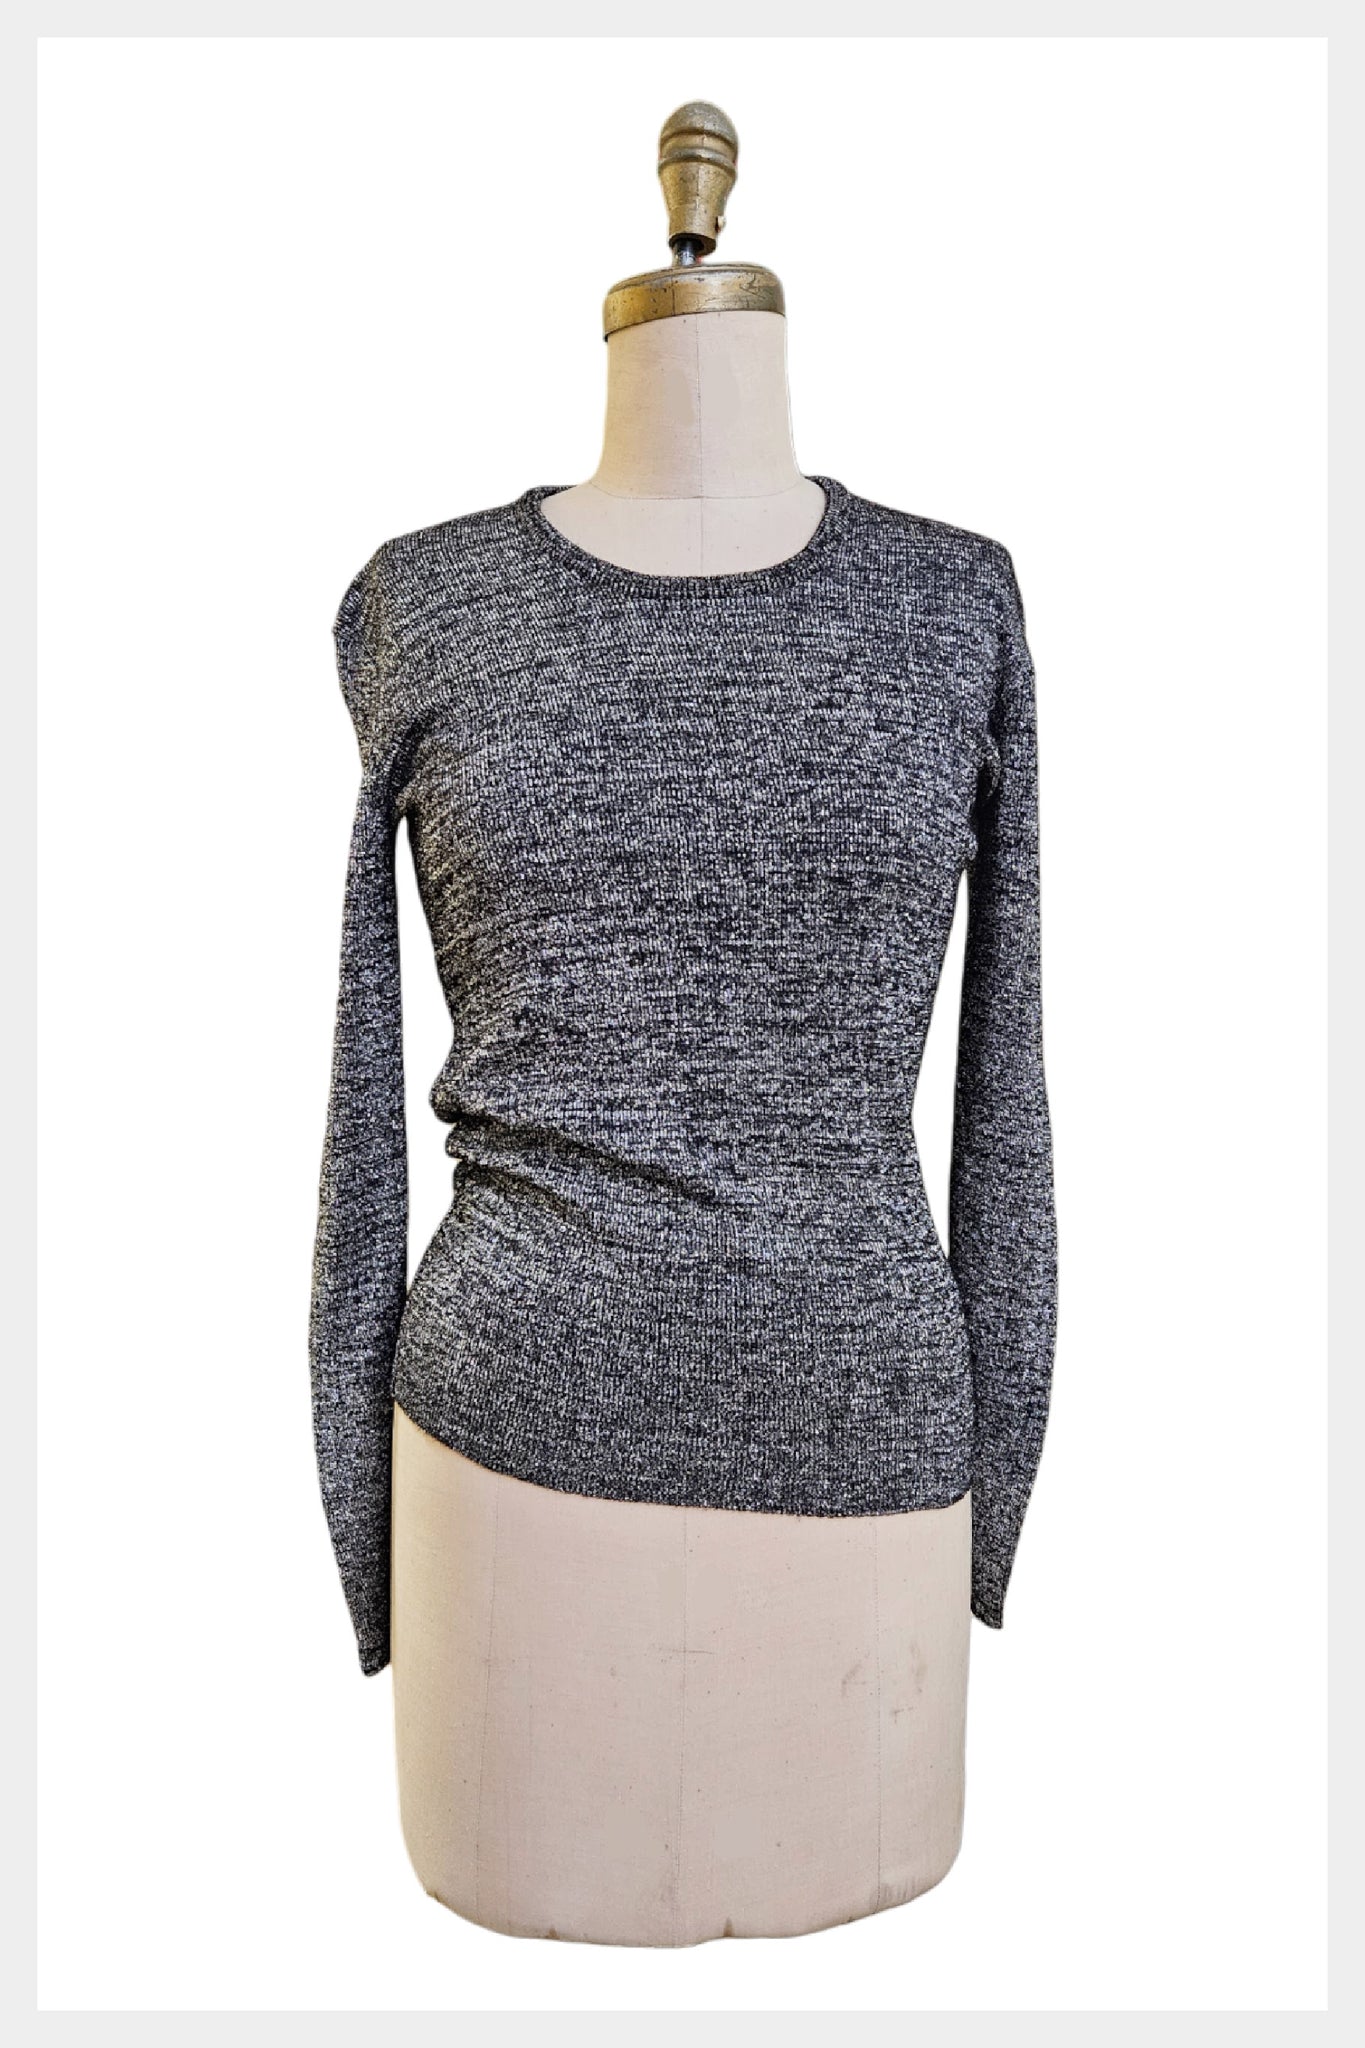 Vintage 1970s silver and black space dyed sparkly party sweater | Size M